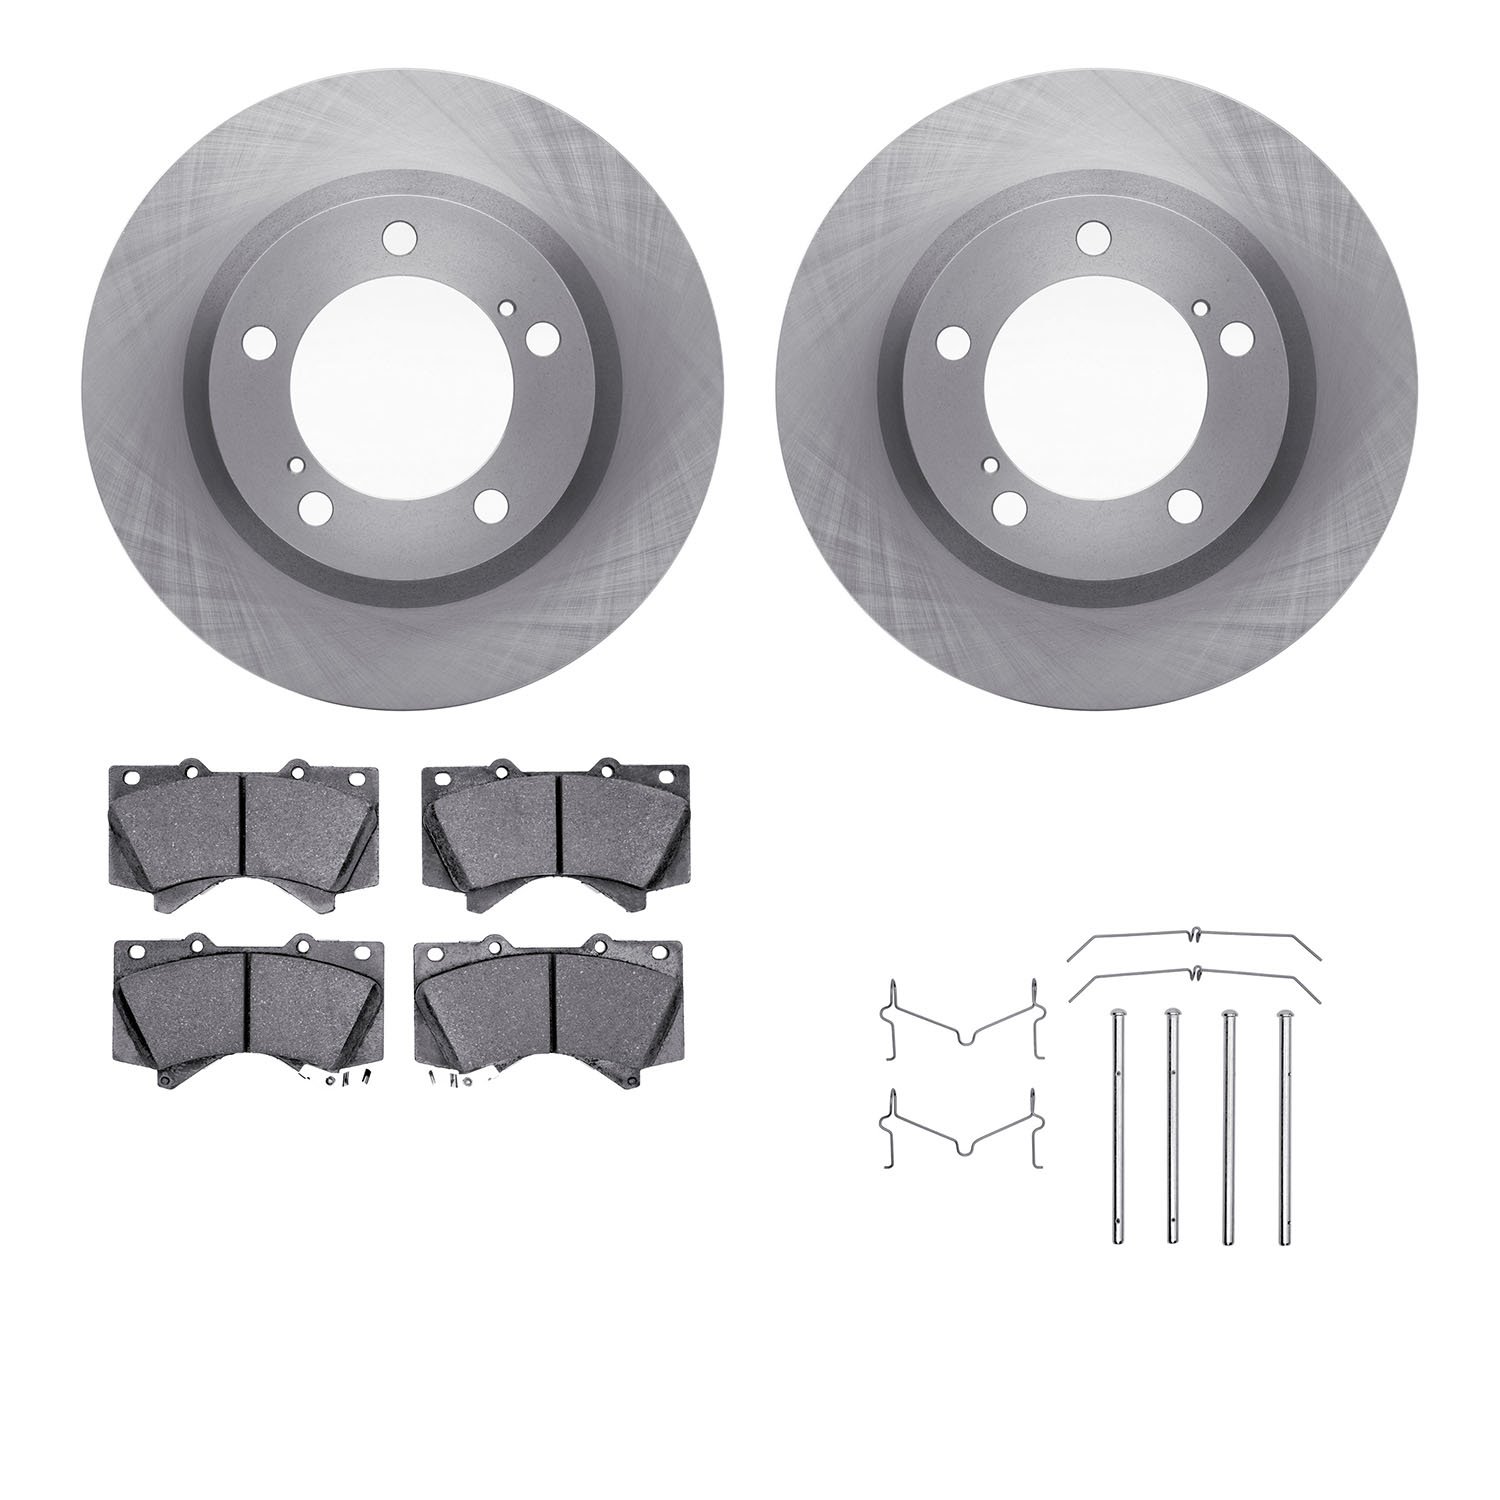 6412-76061 Brake Rotors with Ultimate-Duty Brake Pads Kit & Hardware, 2008-2021 Lexus/Toyota/Scion, Position: Front